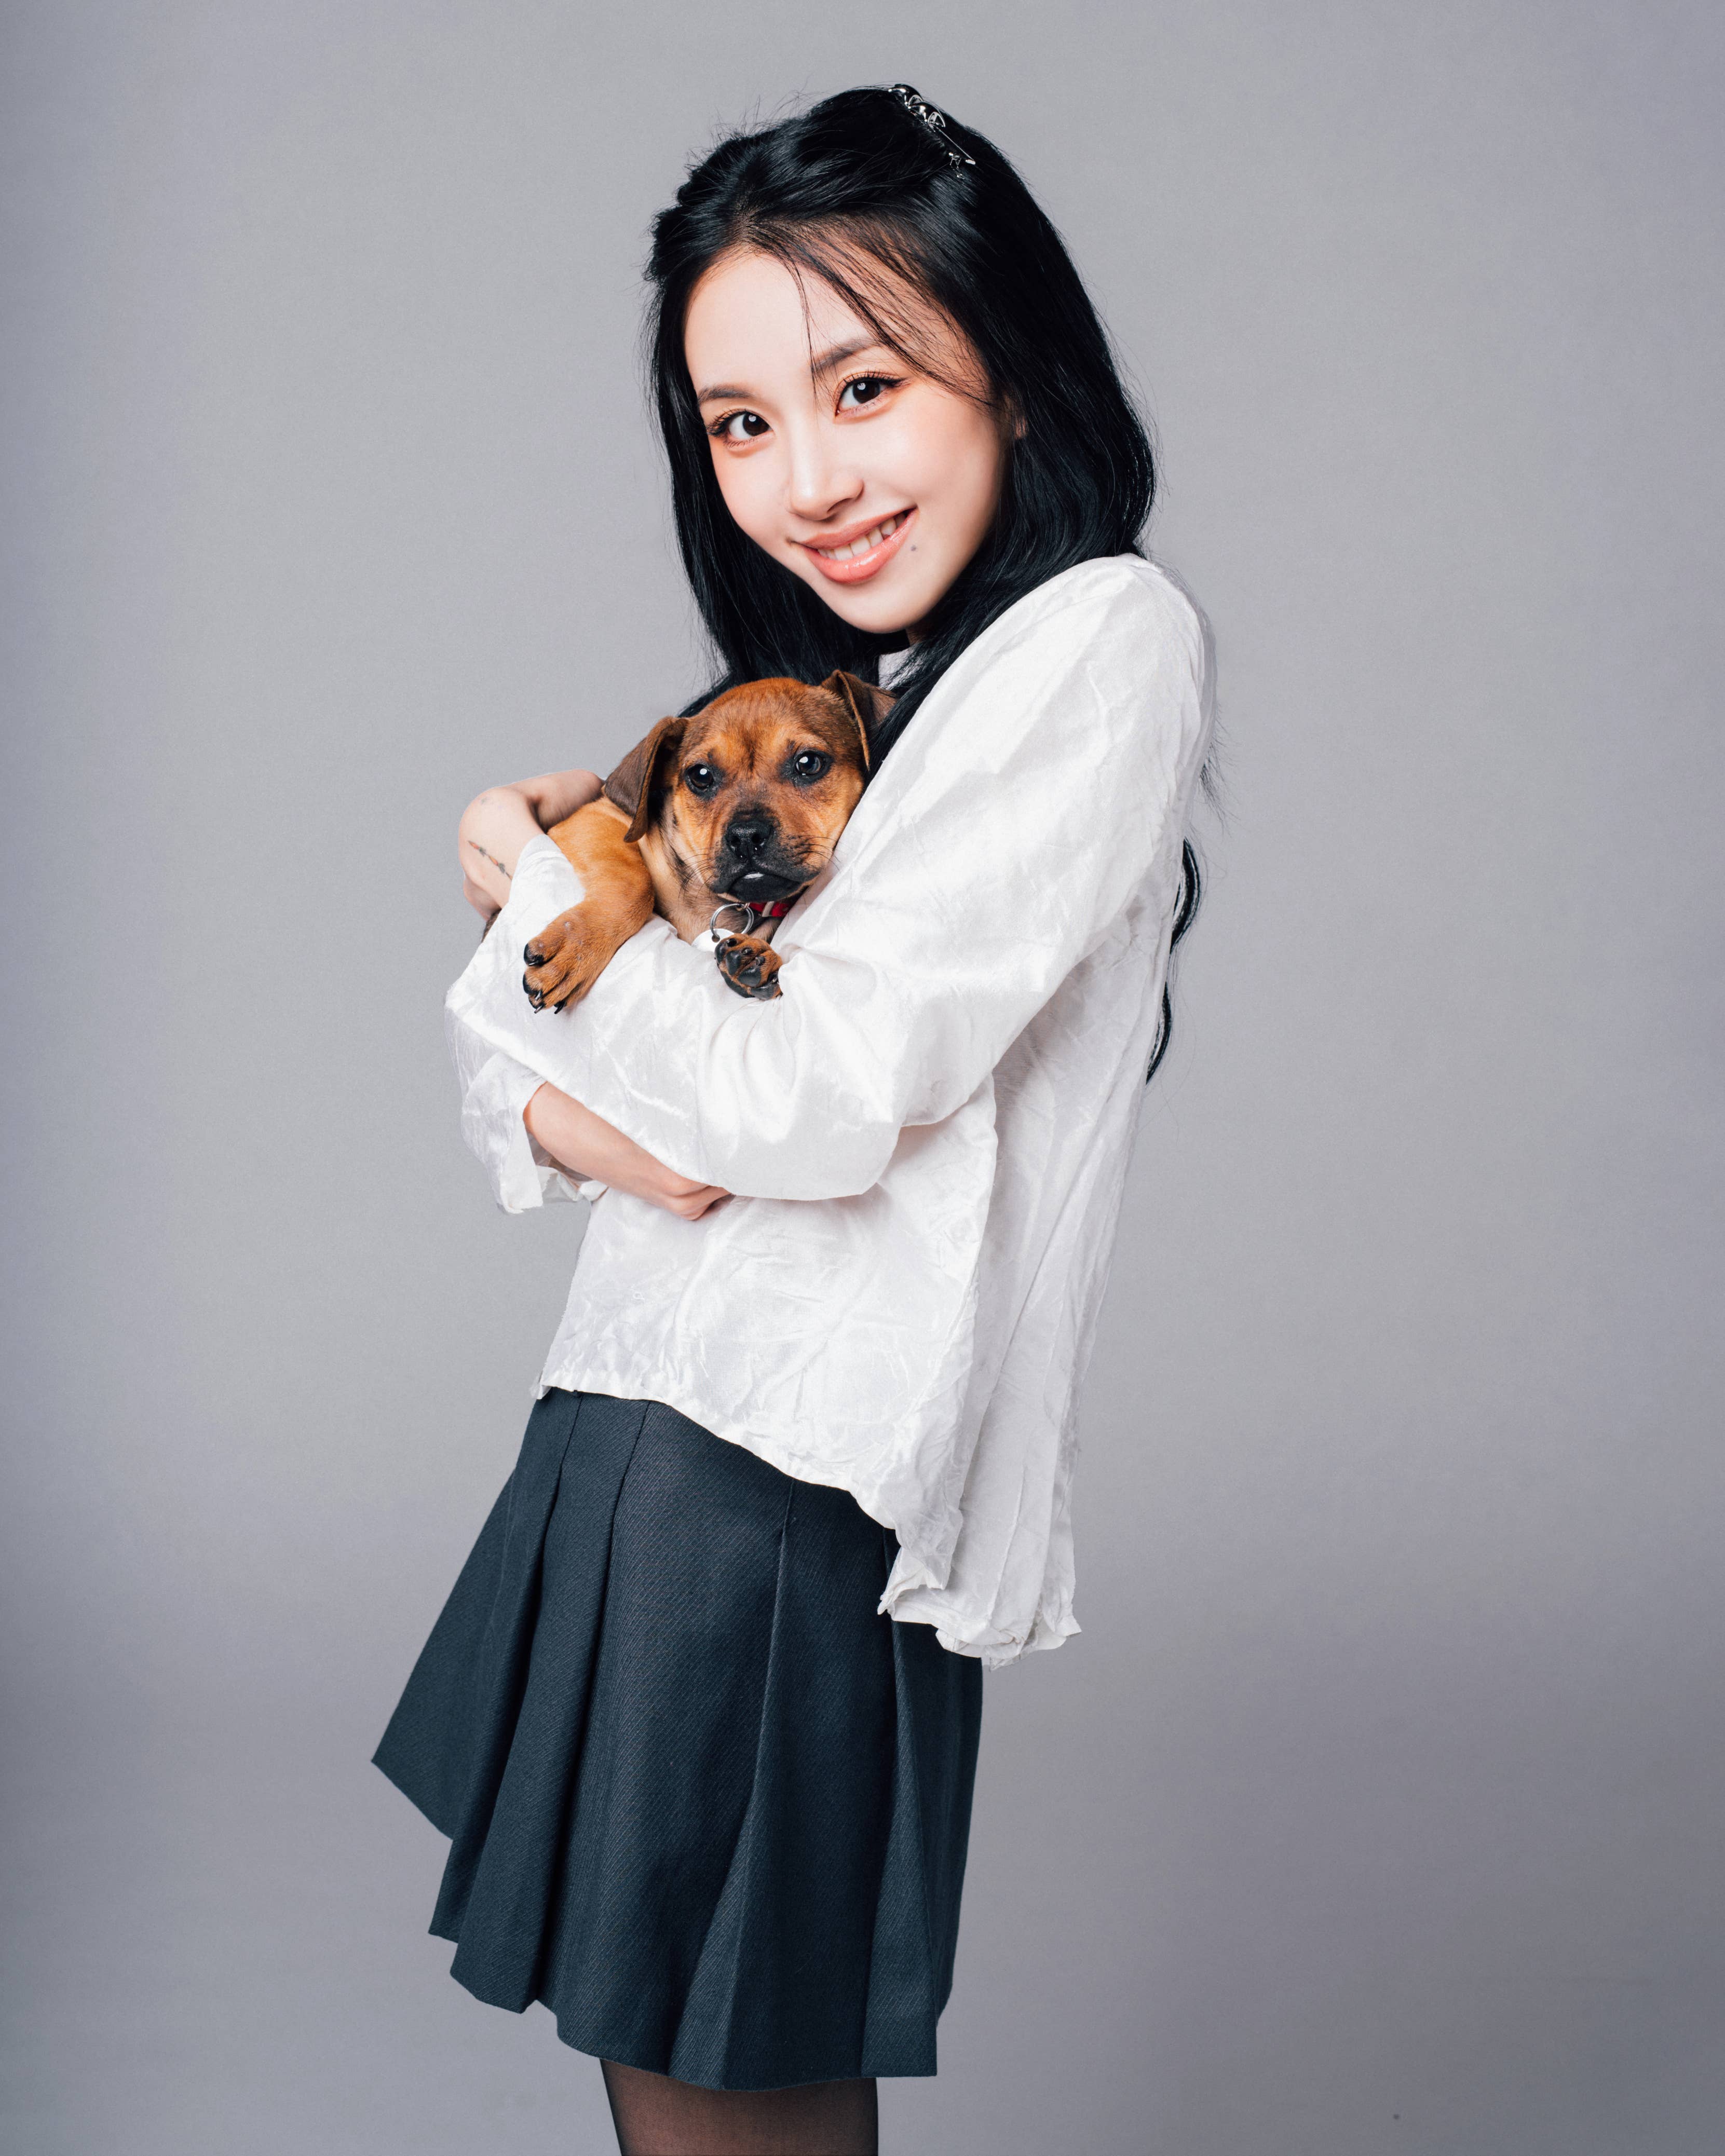 Woman holding a small dog, smiling at the camera, wearing a white blouse and black pleated skirt